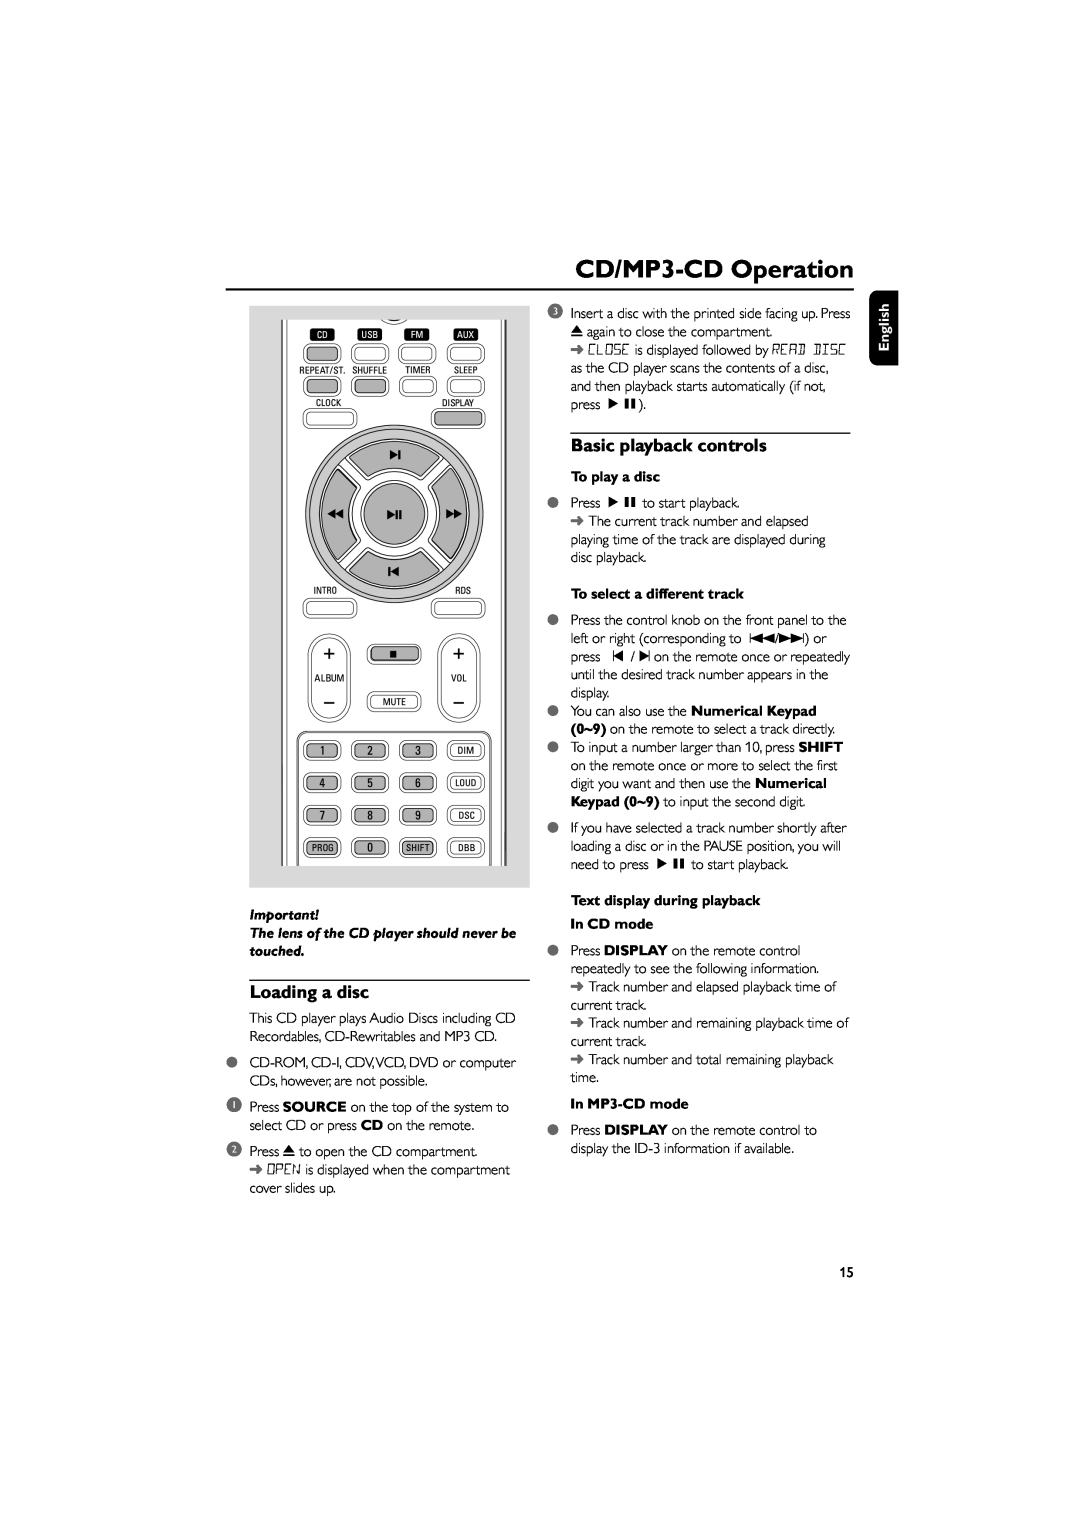 Philips MCM700 CD/MP3-CDOperation, Loading a disc, Basic playback controls, To play a disc, To select a different track 